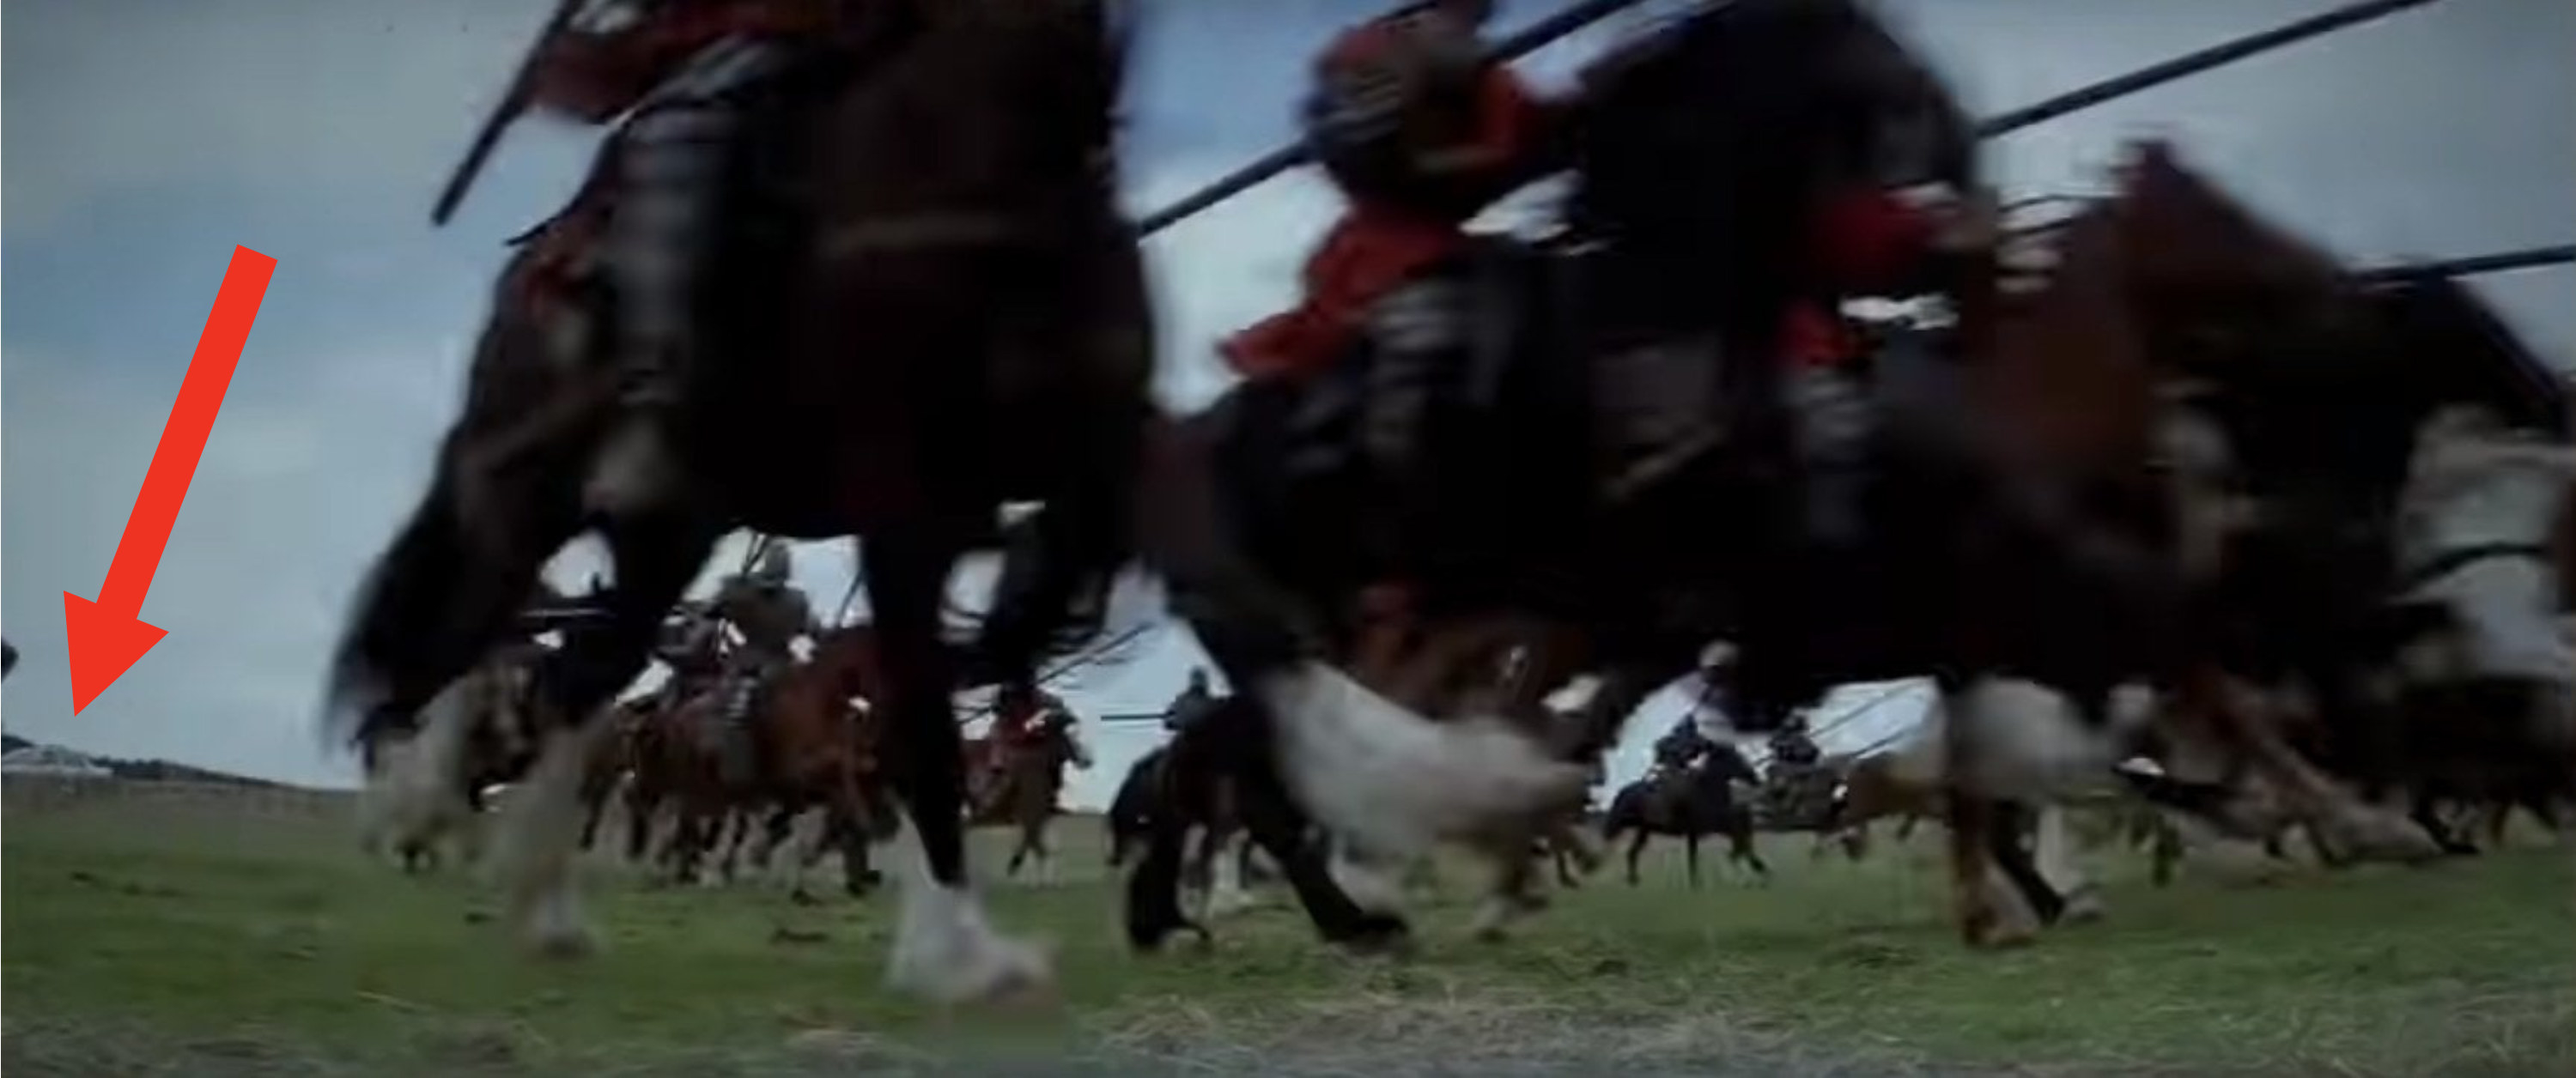 A car in the background of a shot in Braveheart